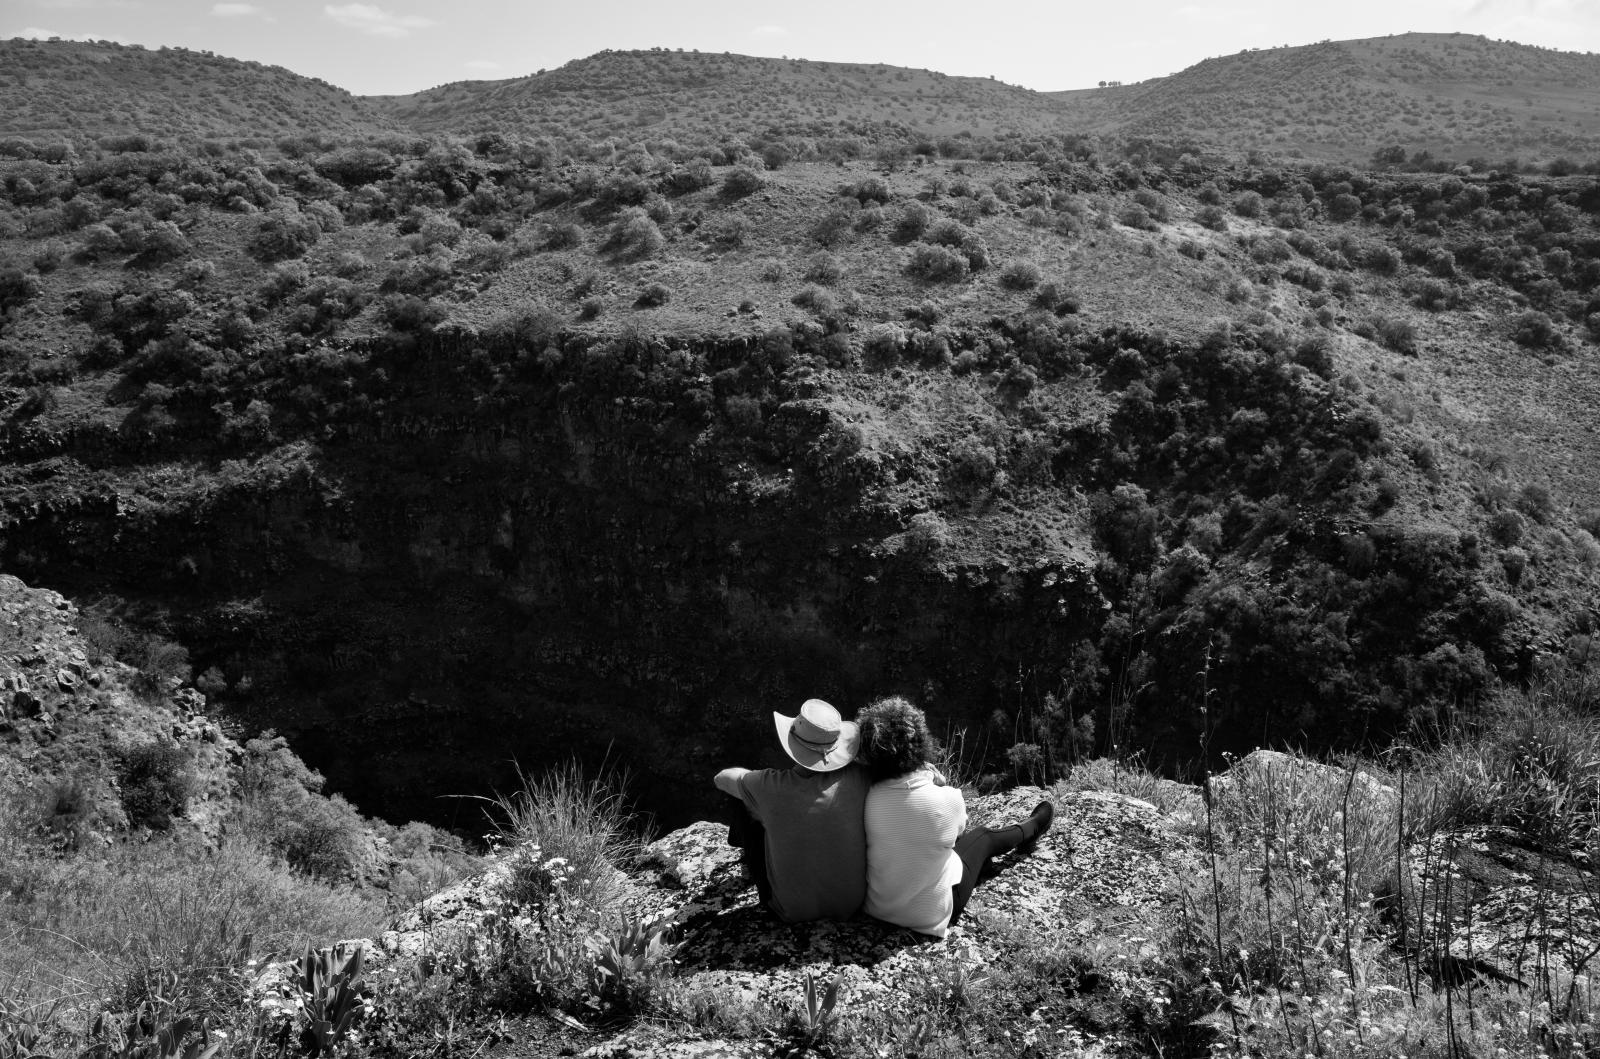 Couple relaxing in mountains.